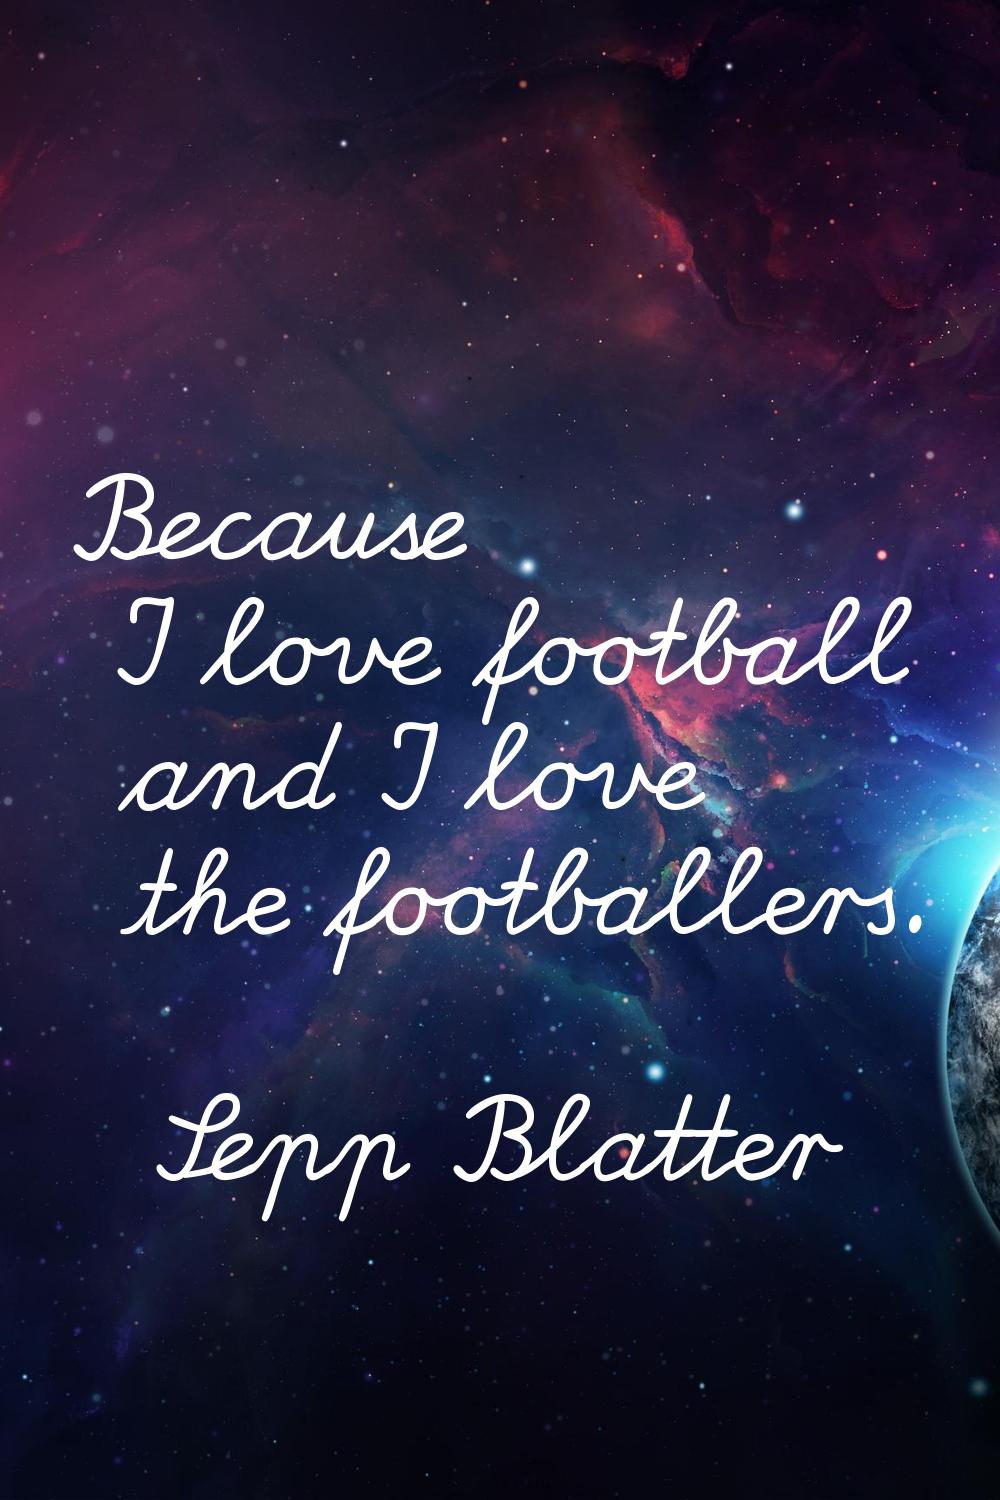 Because I love football and I love the footballers.